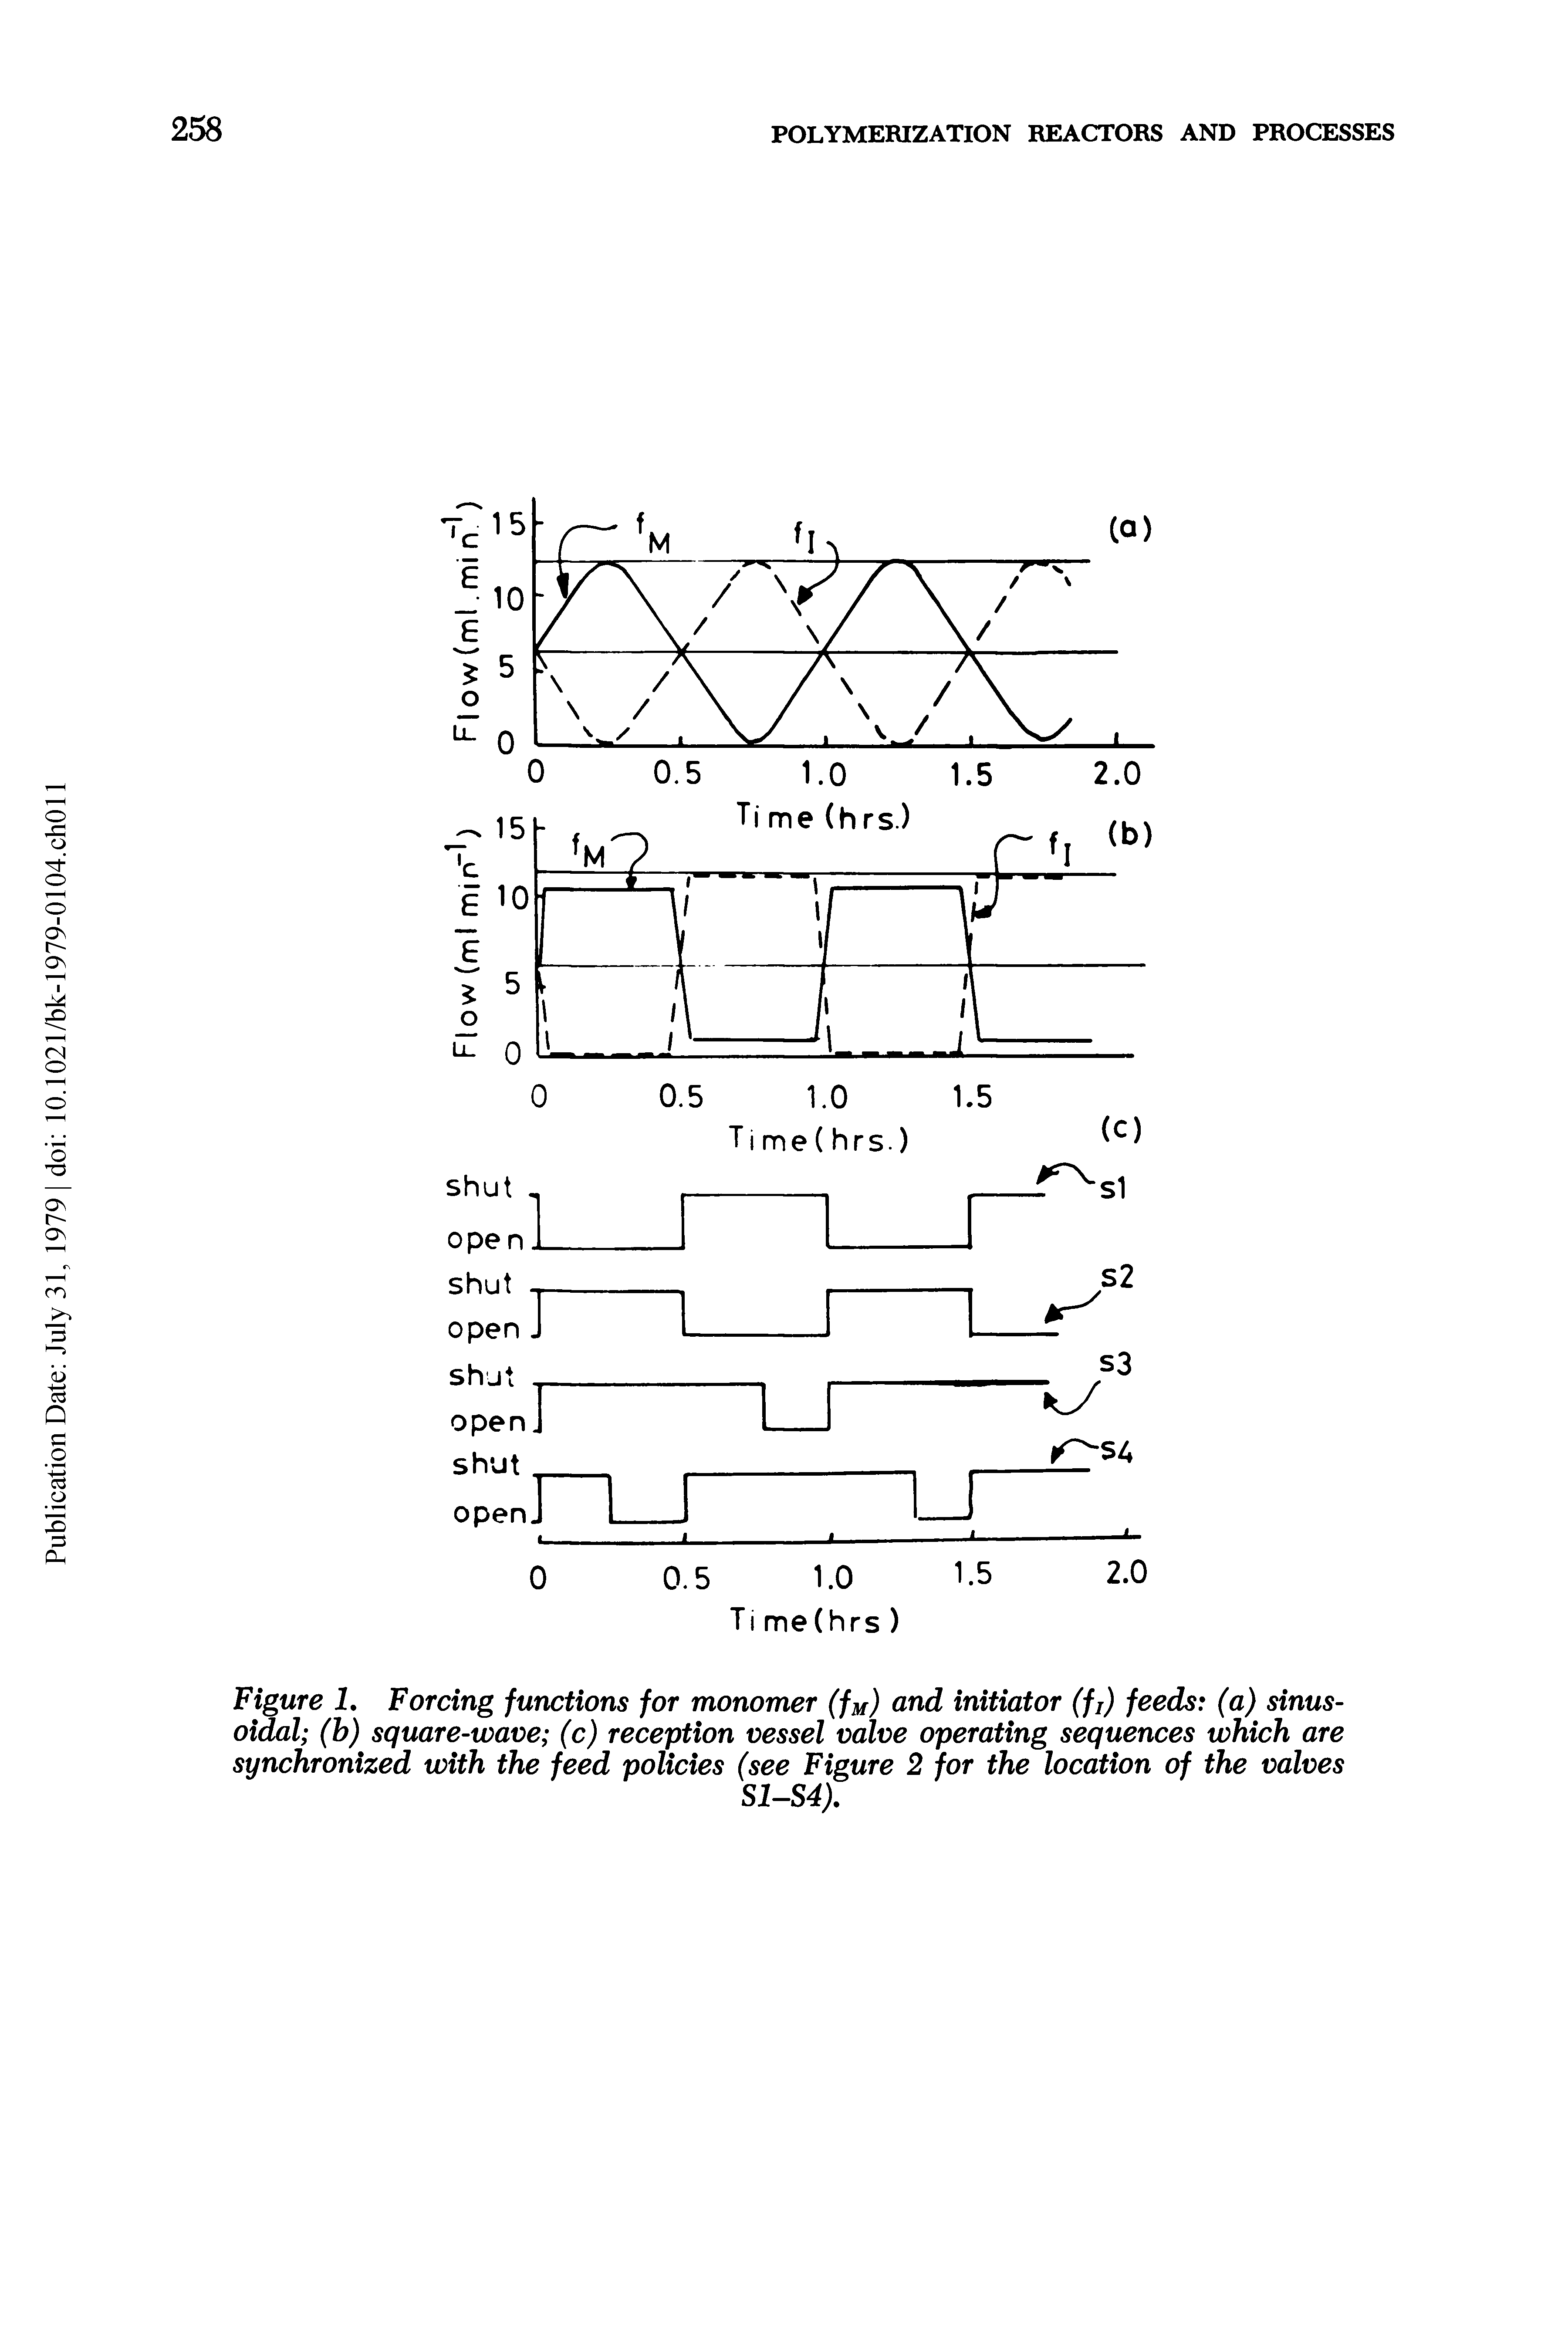 Figure 1, Forcing functions for monomer (fu) and initiator (fi) feeds (a) sinusoidal (b) square-wave (c) reception vessel valve operating sequences which are synchronized with the feed policies (see Figure 2 for the location of the valves...